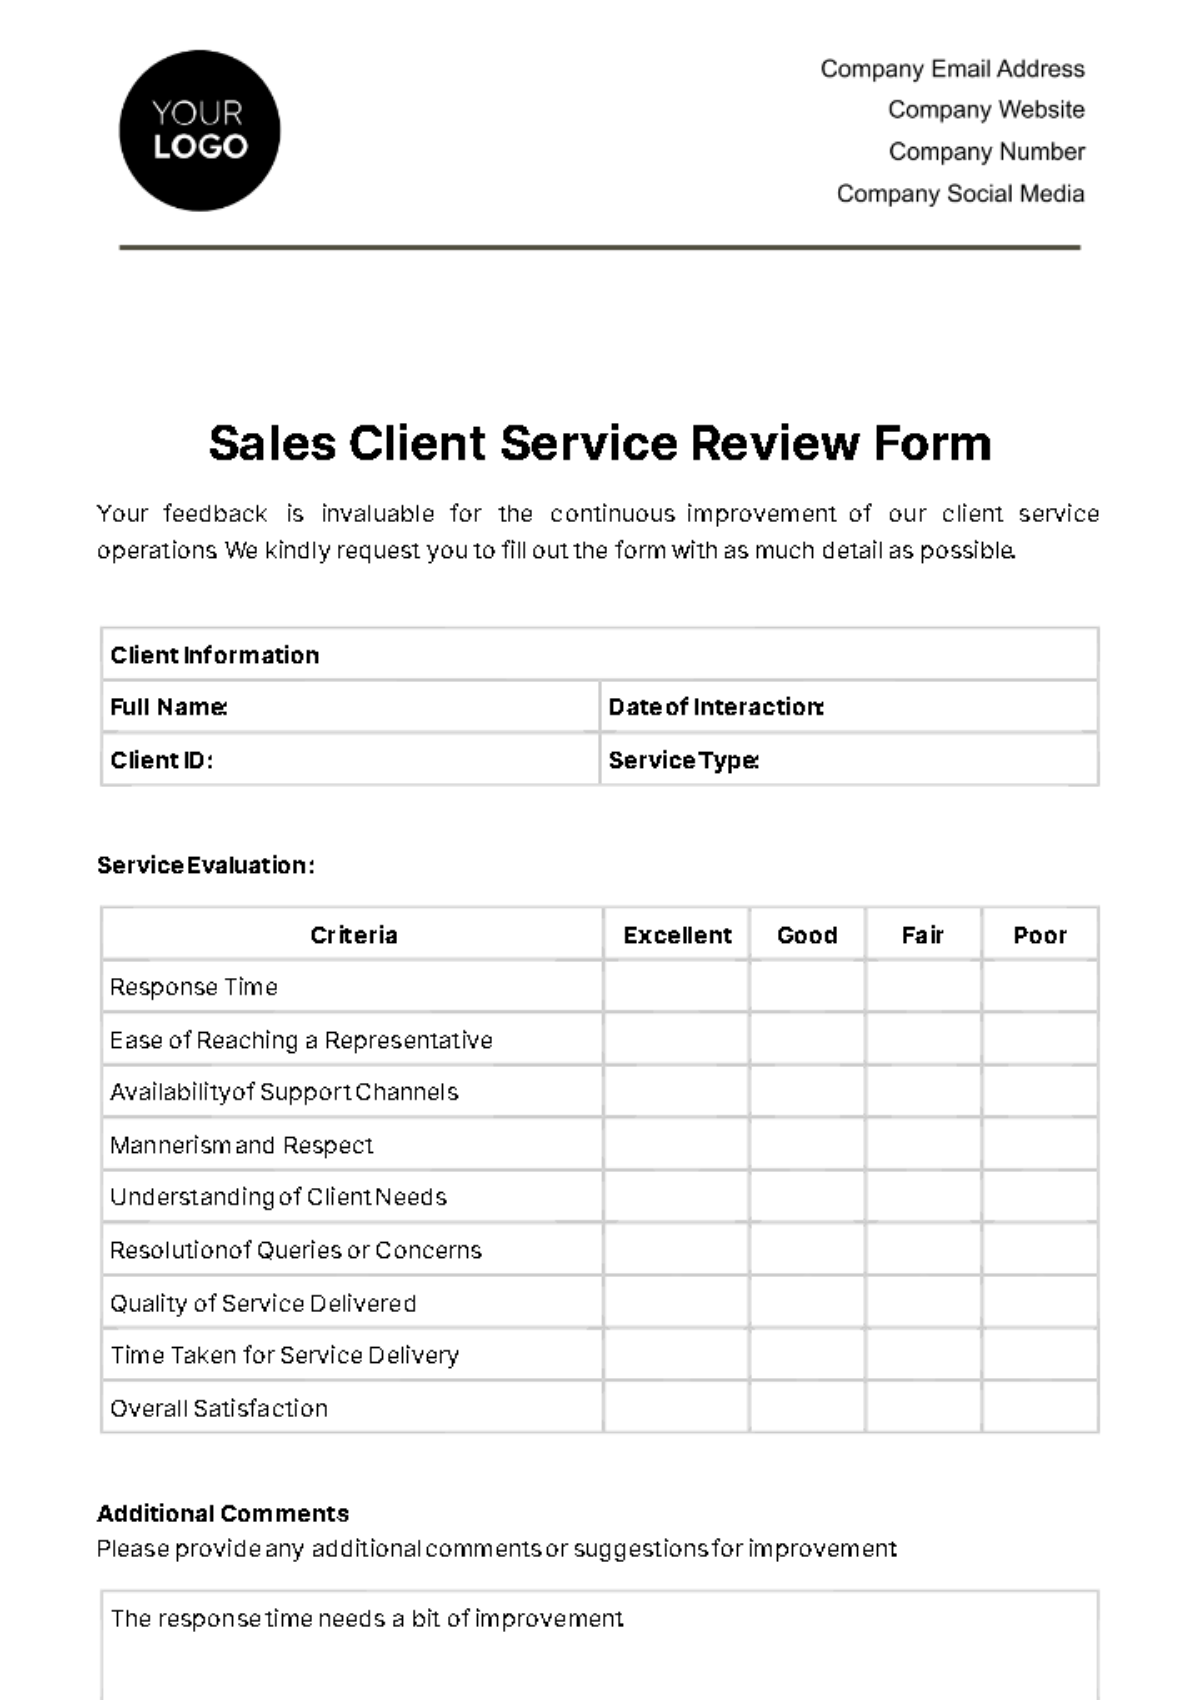 Free Sales Client Service Review Form Template